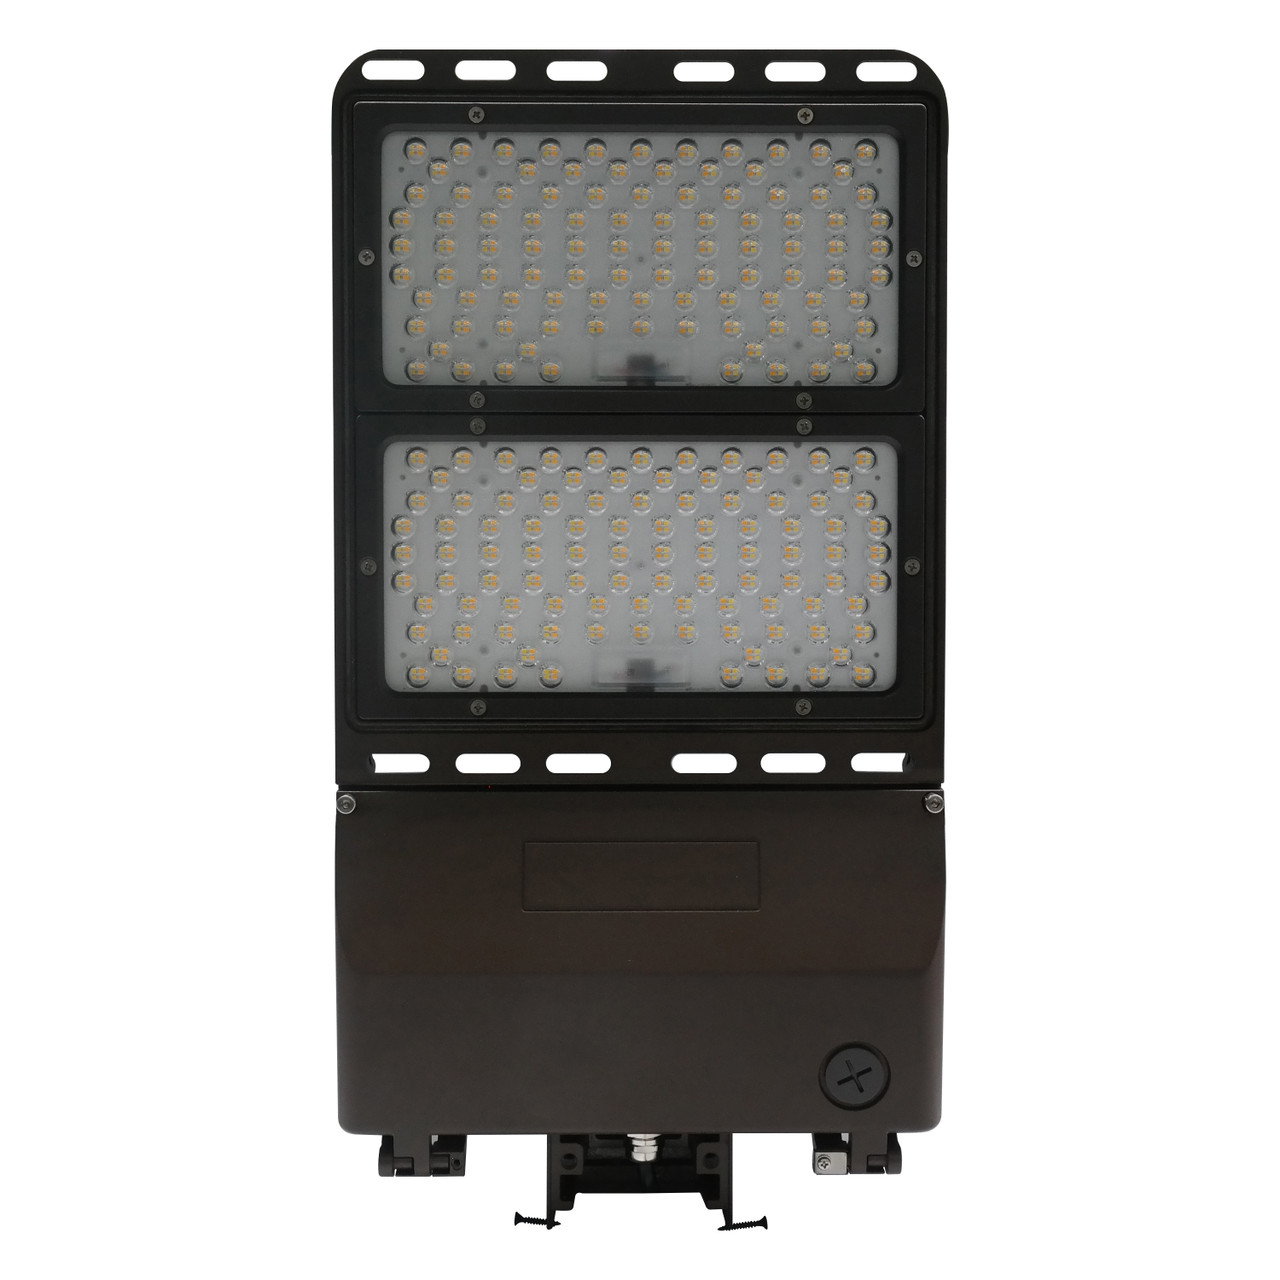 LED Parking Lot Flood Light Can be used for all LED Outdoor Flood Lighting  Requirements, 300 Watt 44,000 Lumens, With Adjustable Slipfitter Mount  for 2-3/8 Inch Pole Mount